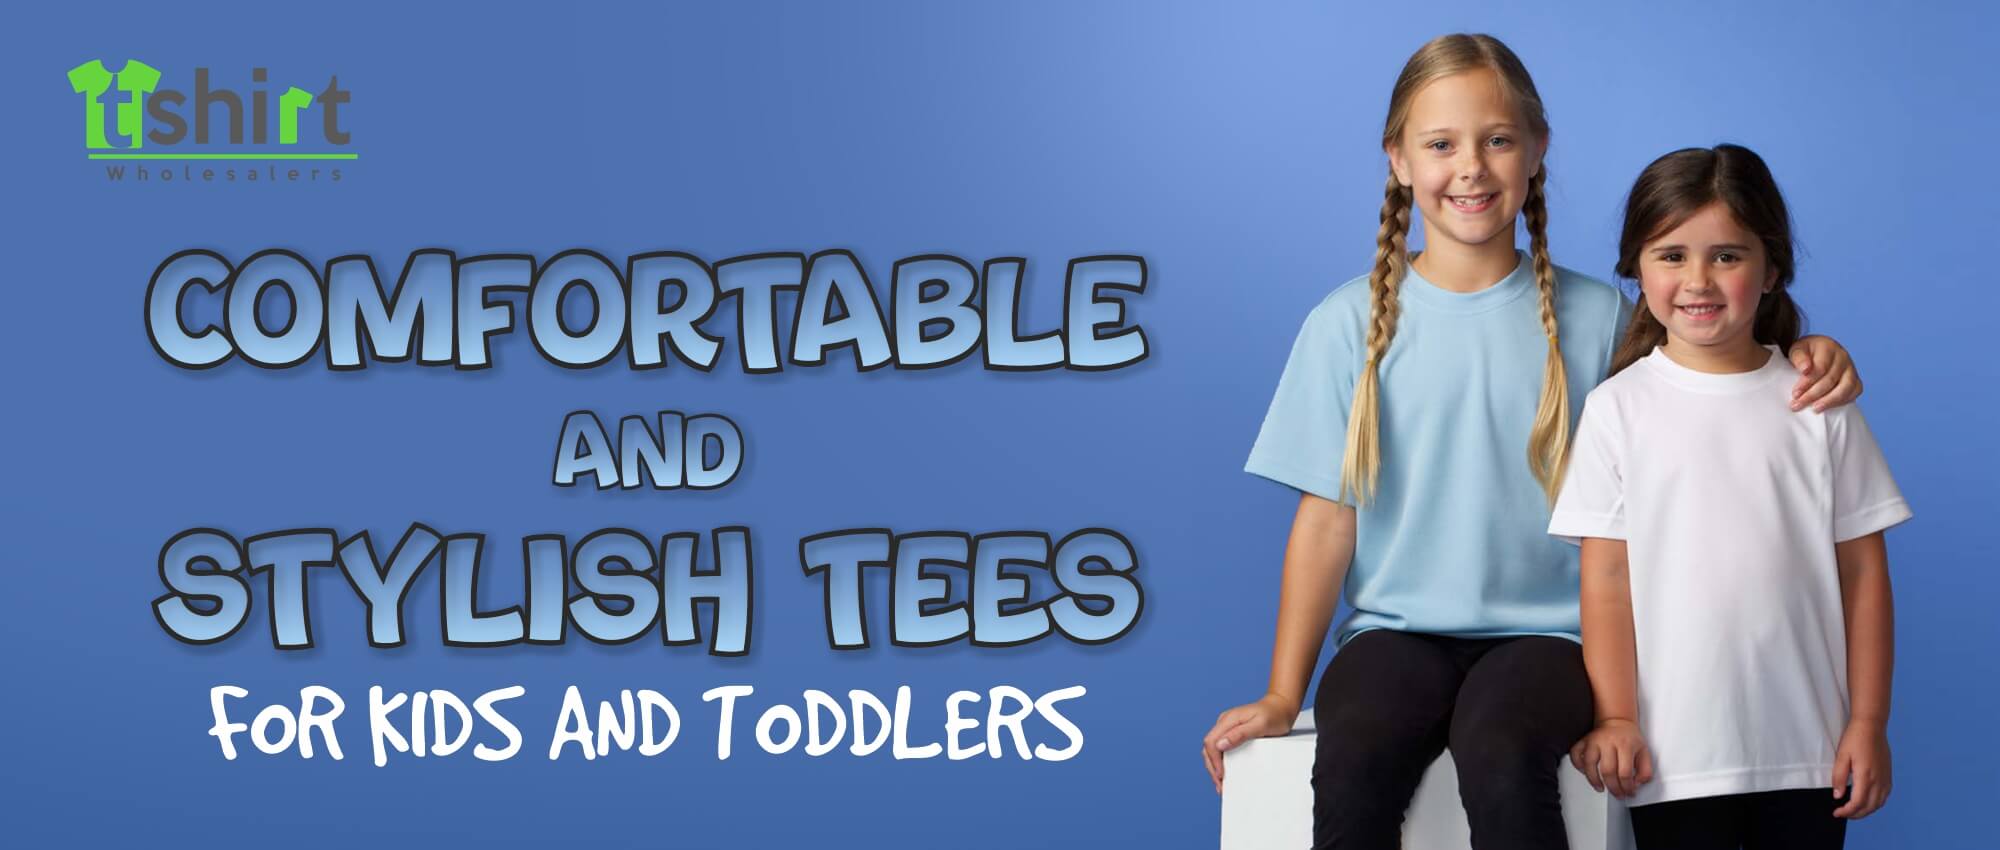 COMFORTABLE AND STYLISH TEES FOR KIDS AND TODDLERS